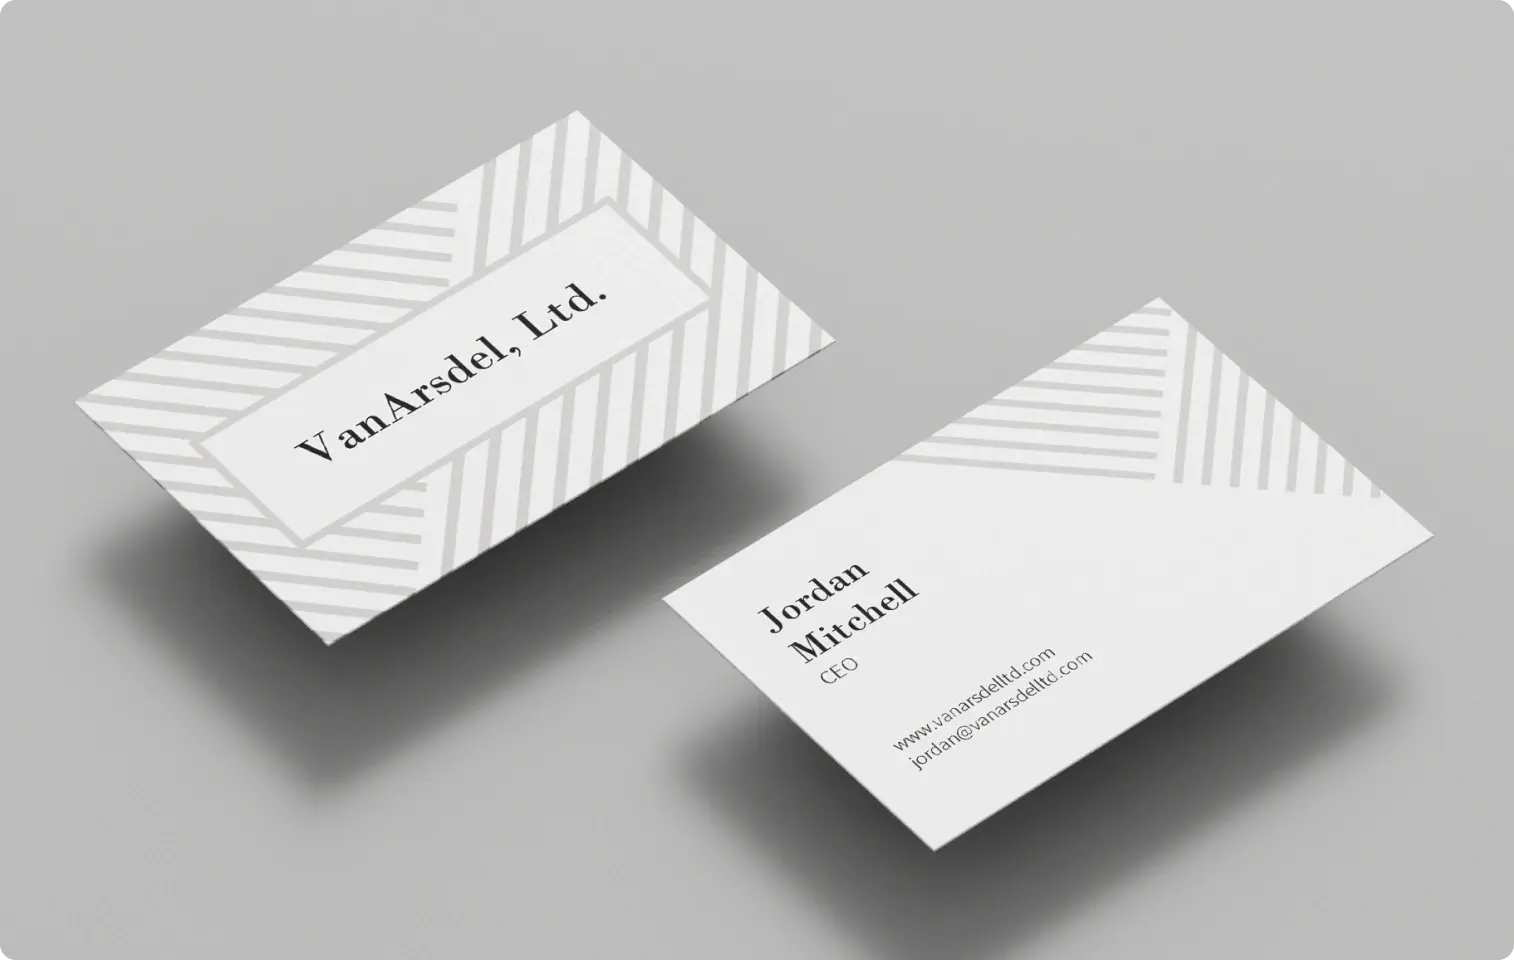 Business cards with a lot of white space.